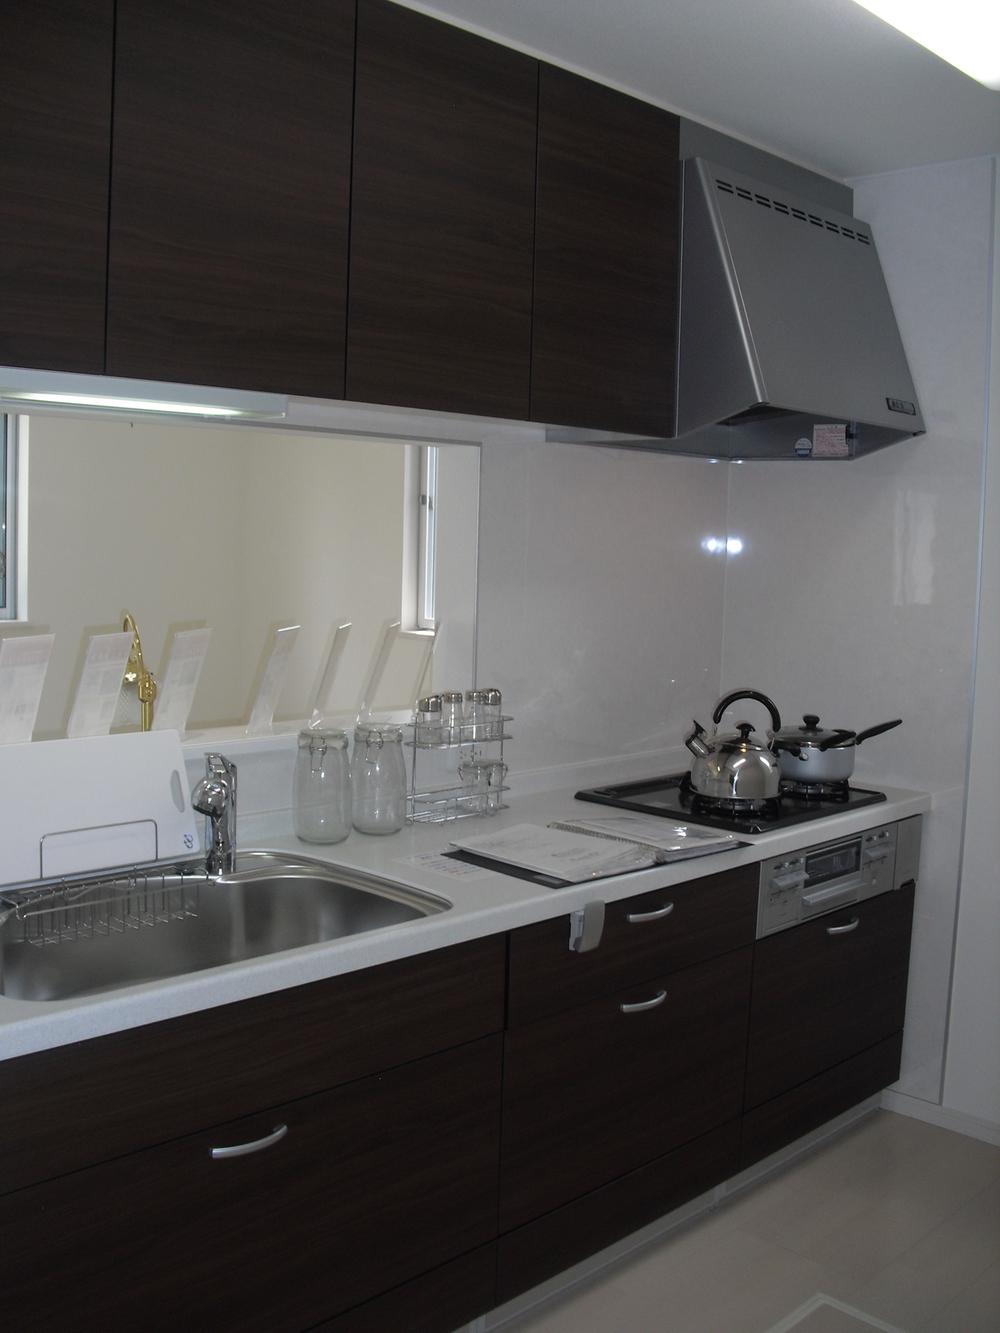 Same specifications photo (kitchen). Kitchen of image